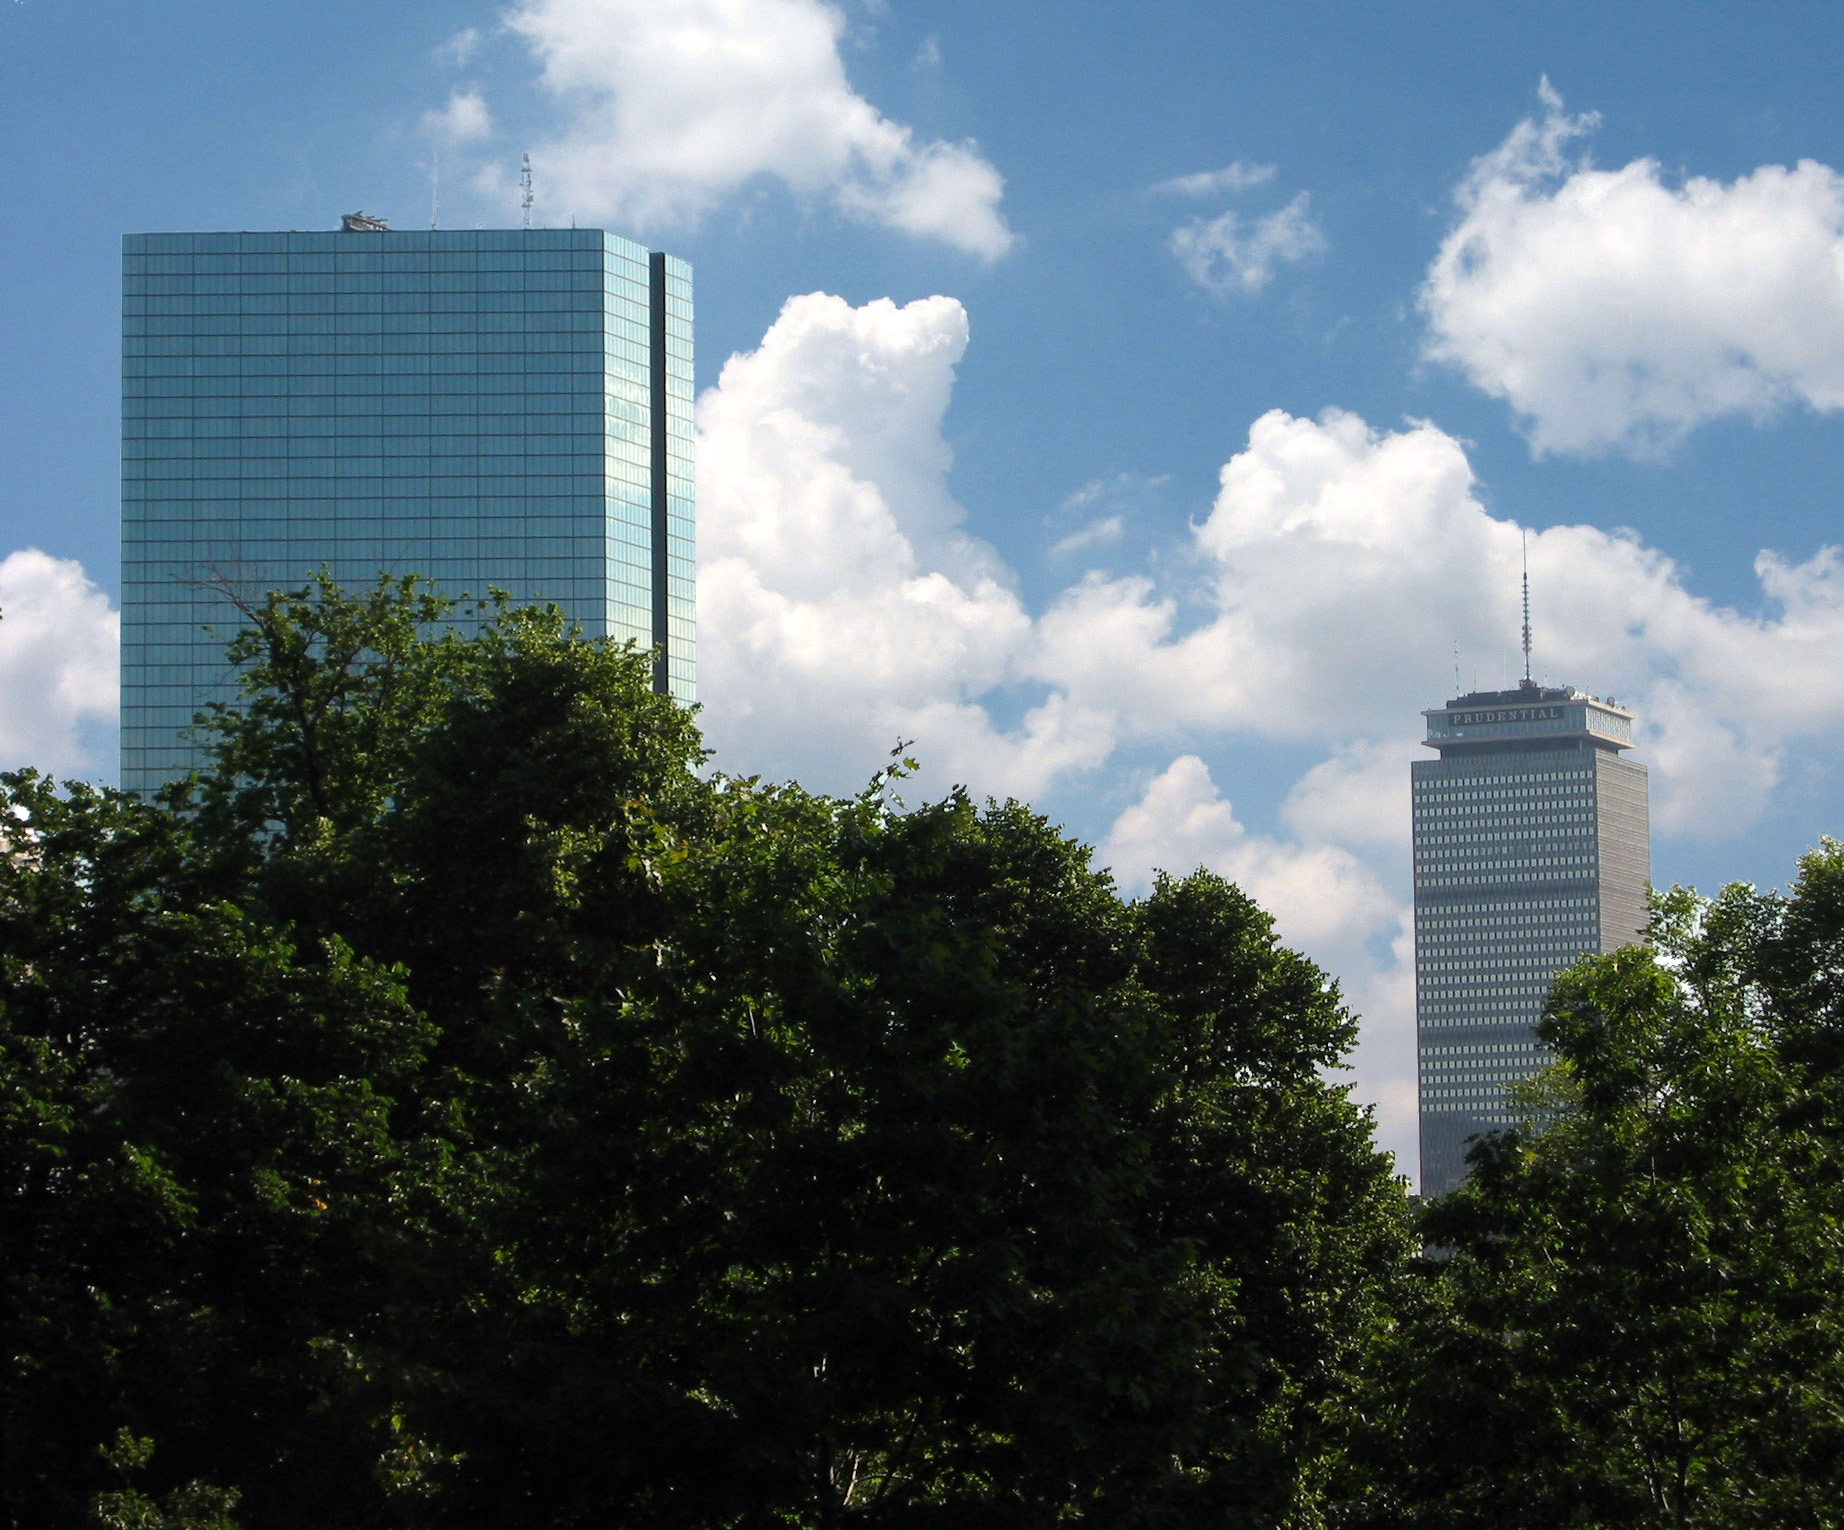 The John Hancock and Prudential Buildings